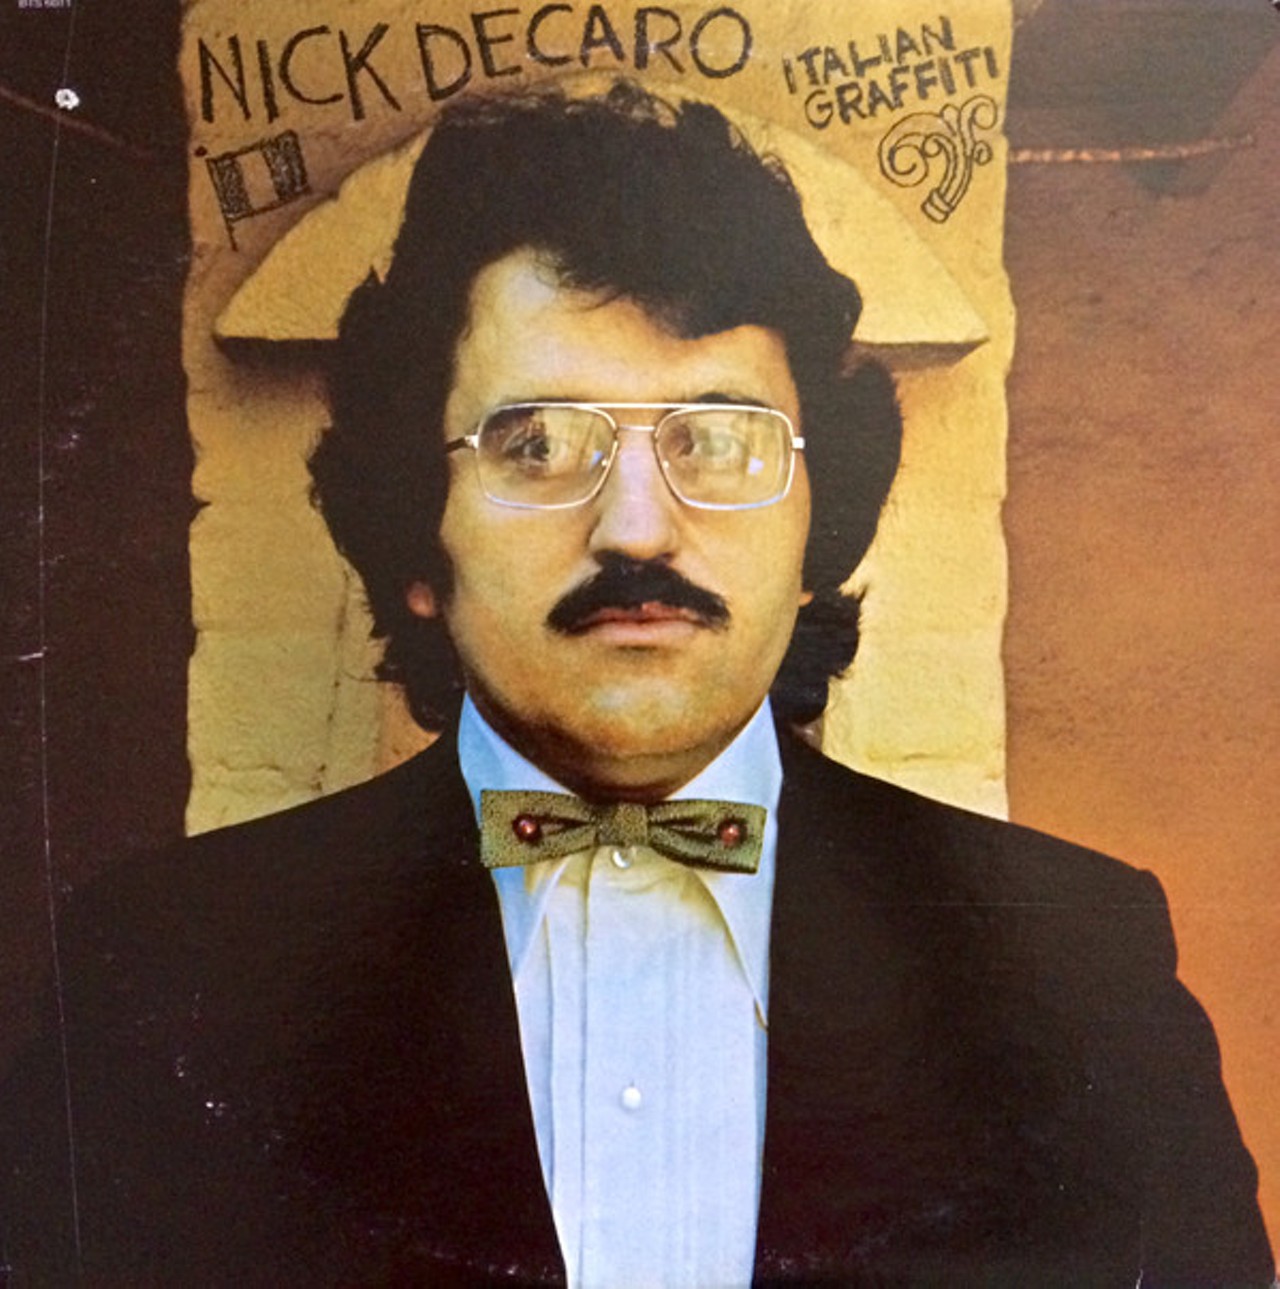 A Celebration of the Life and Career of Nick DeCaro  
Thu, Sept. 20
Album Cover